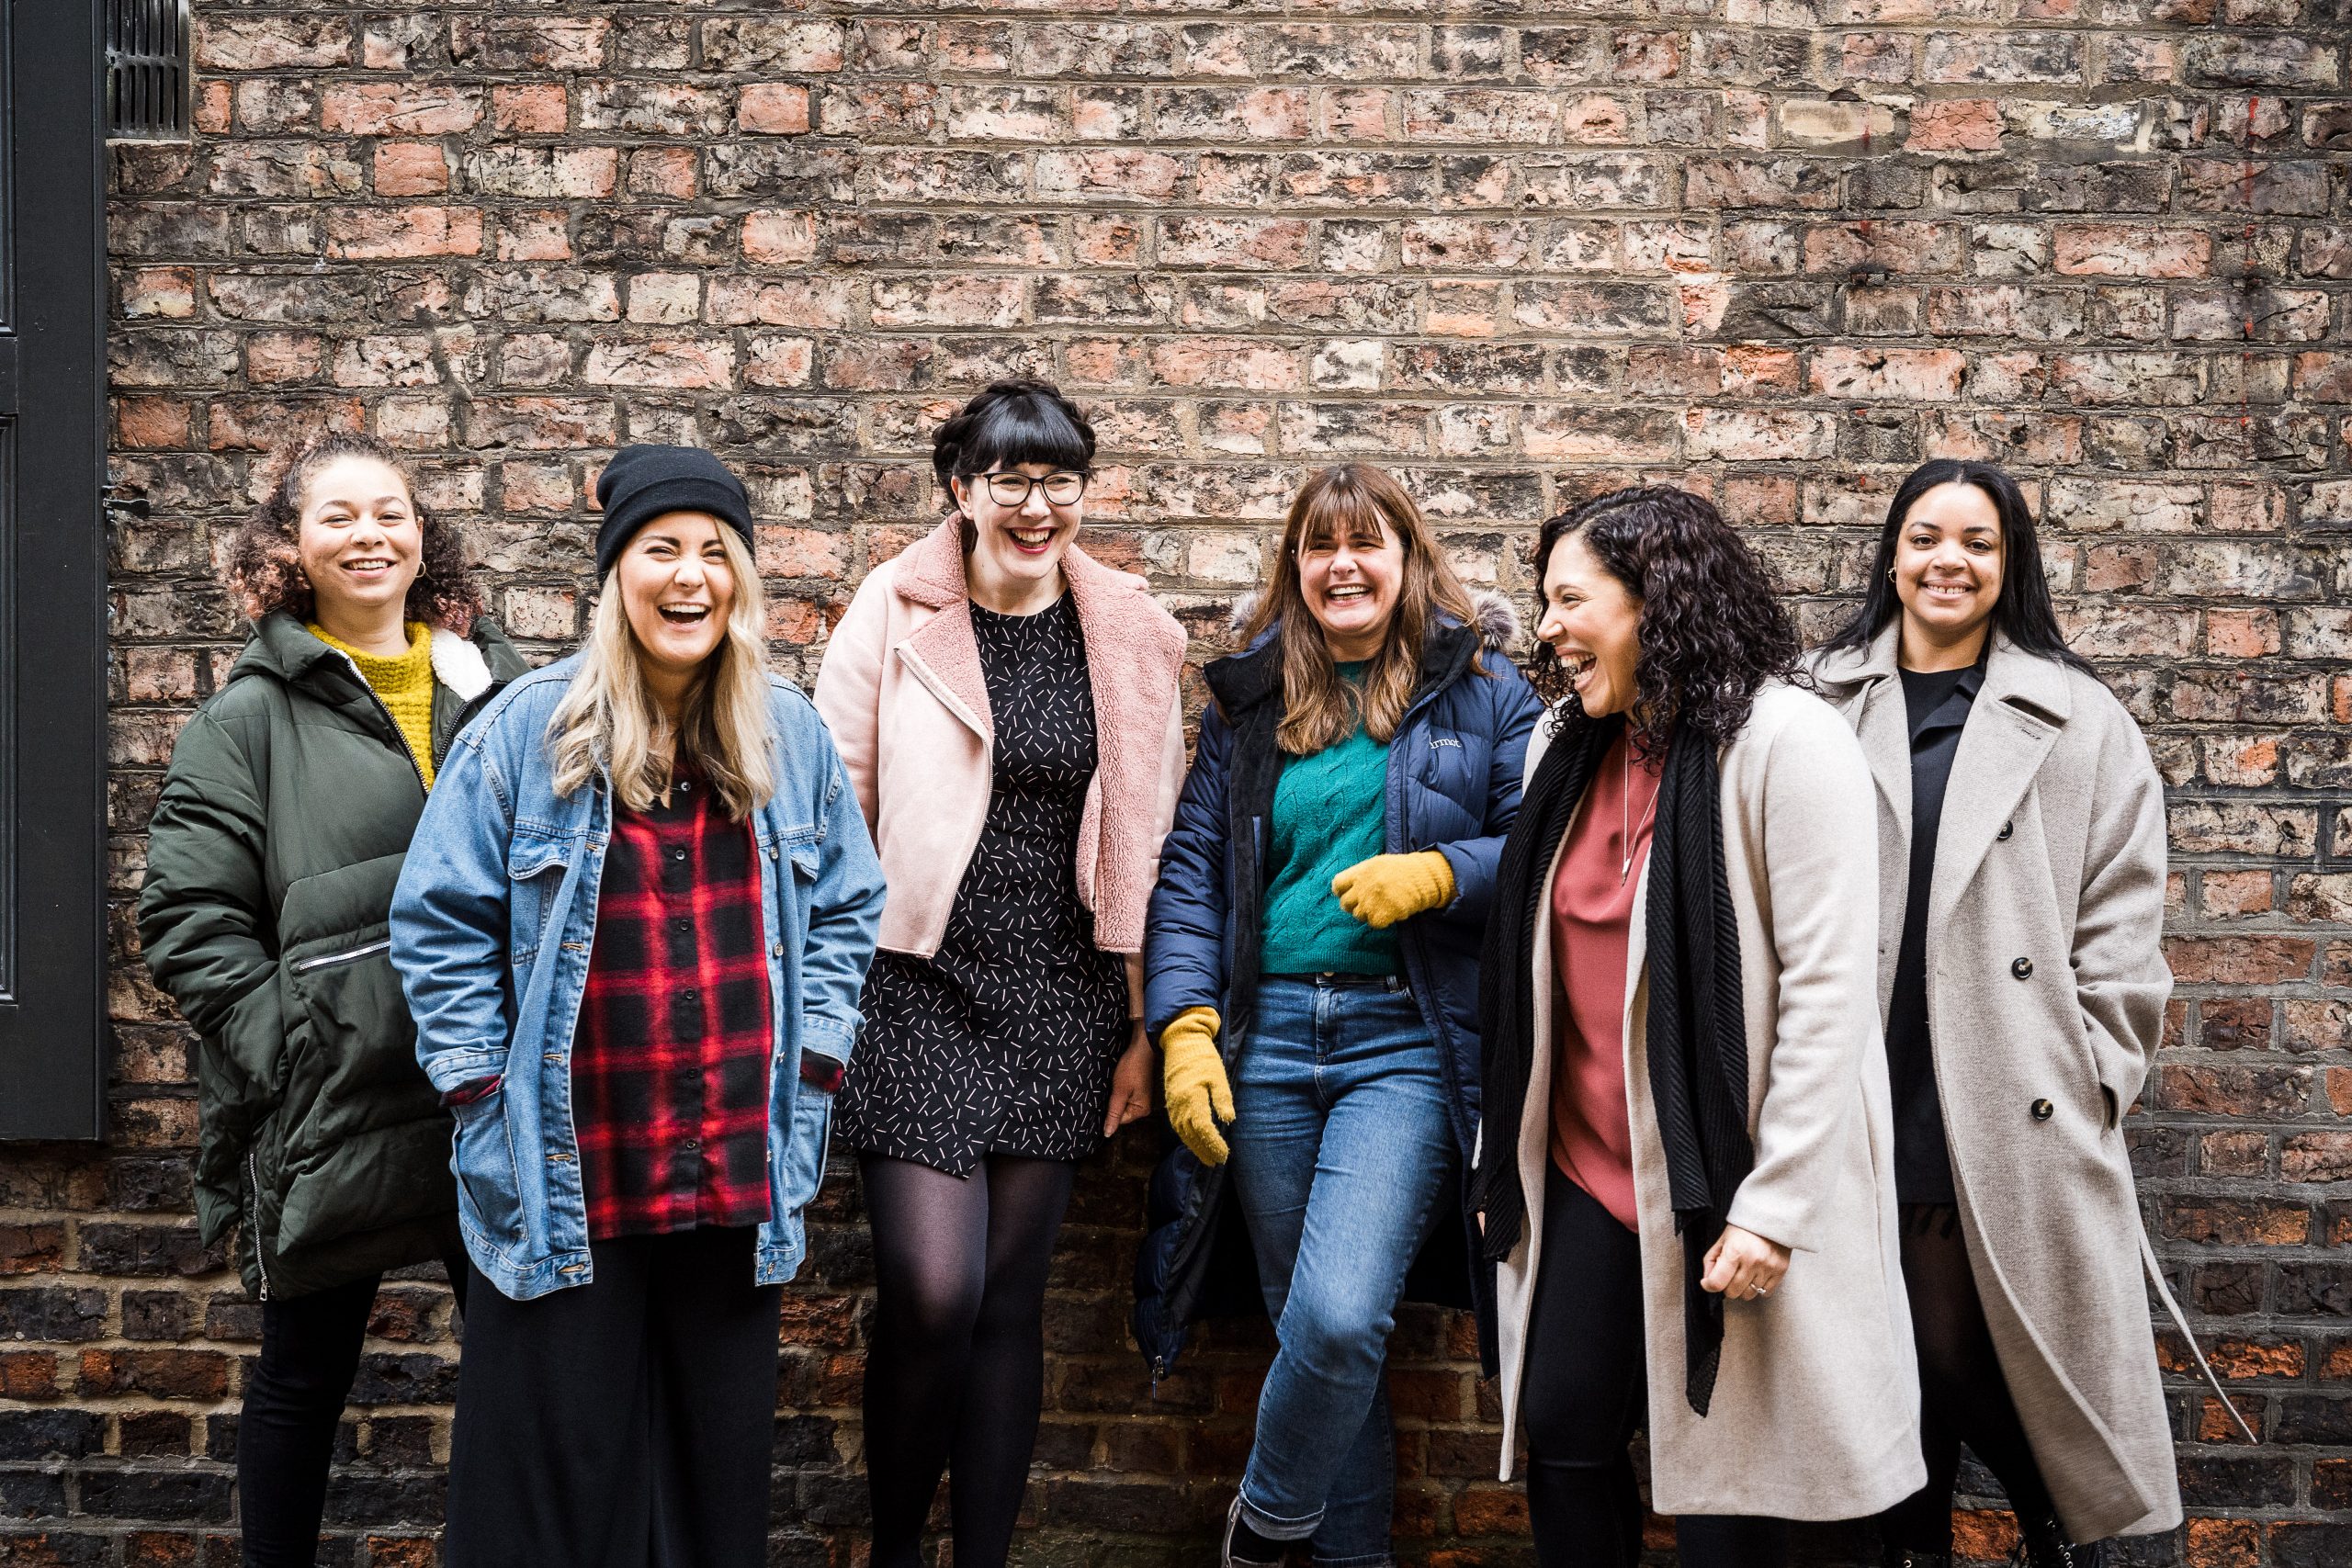 Alt text: The Pregnant Then Screwed team laughing together in front of a brick wall